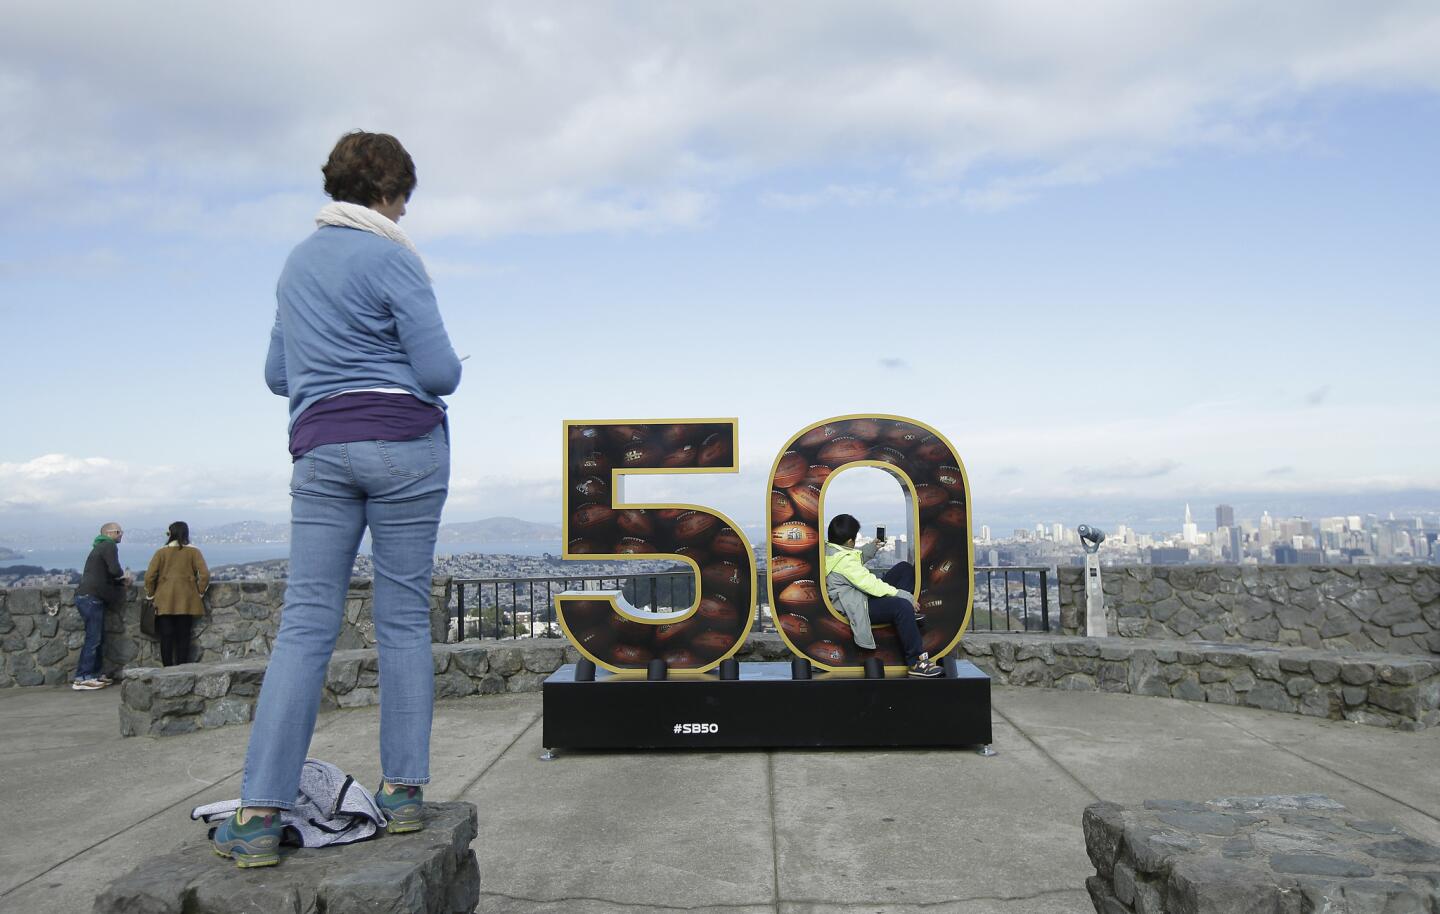 A Super Bowl 50 sign decorates a lookout point at Twin Peaks in San Francisco, Tuesday, Feb. 2, 2016. The Denver Broncos will play the Carolina Panthers in Super Bowl 50 Sunday, Feb. 7, 2016. (AP Photo/Jeff Chiu)